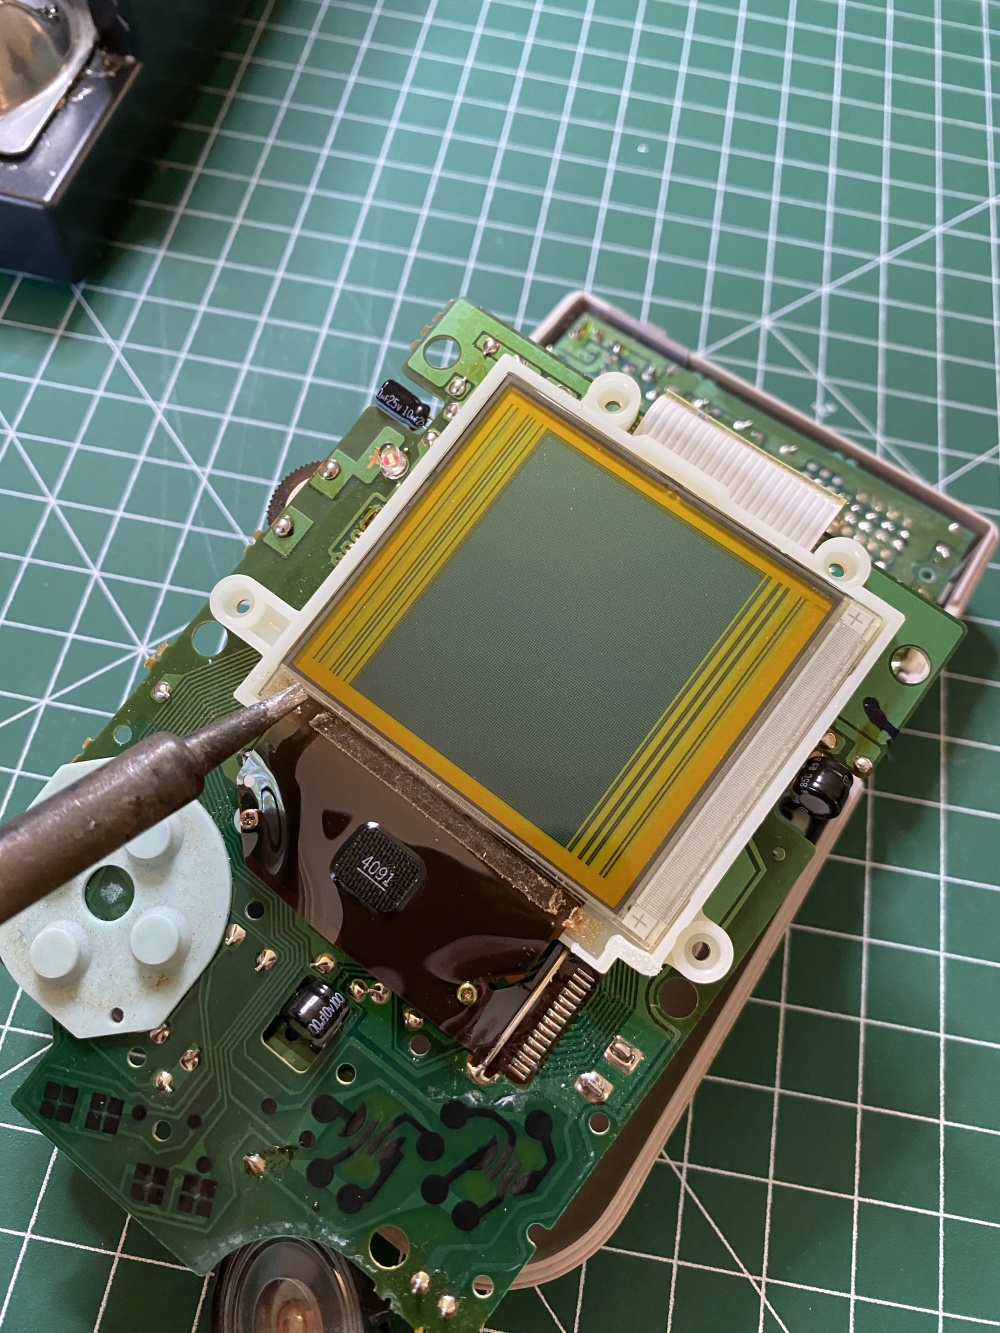 Fix the display with a soldering iron